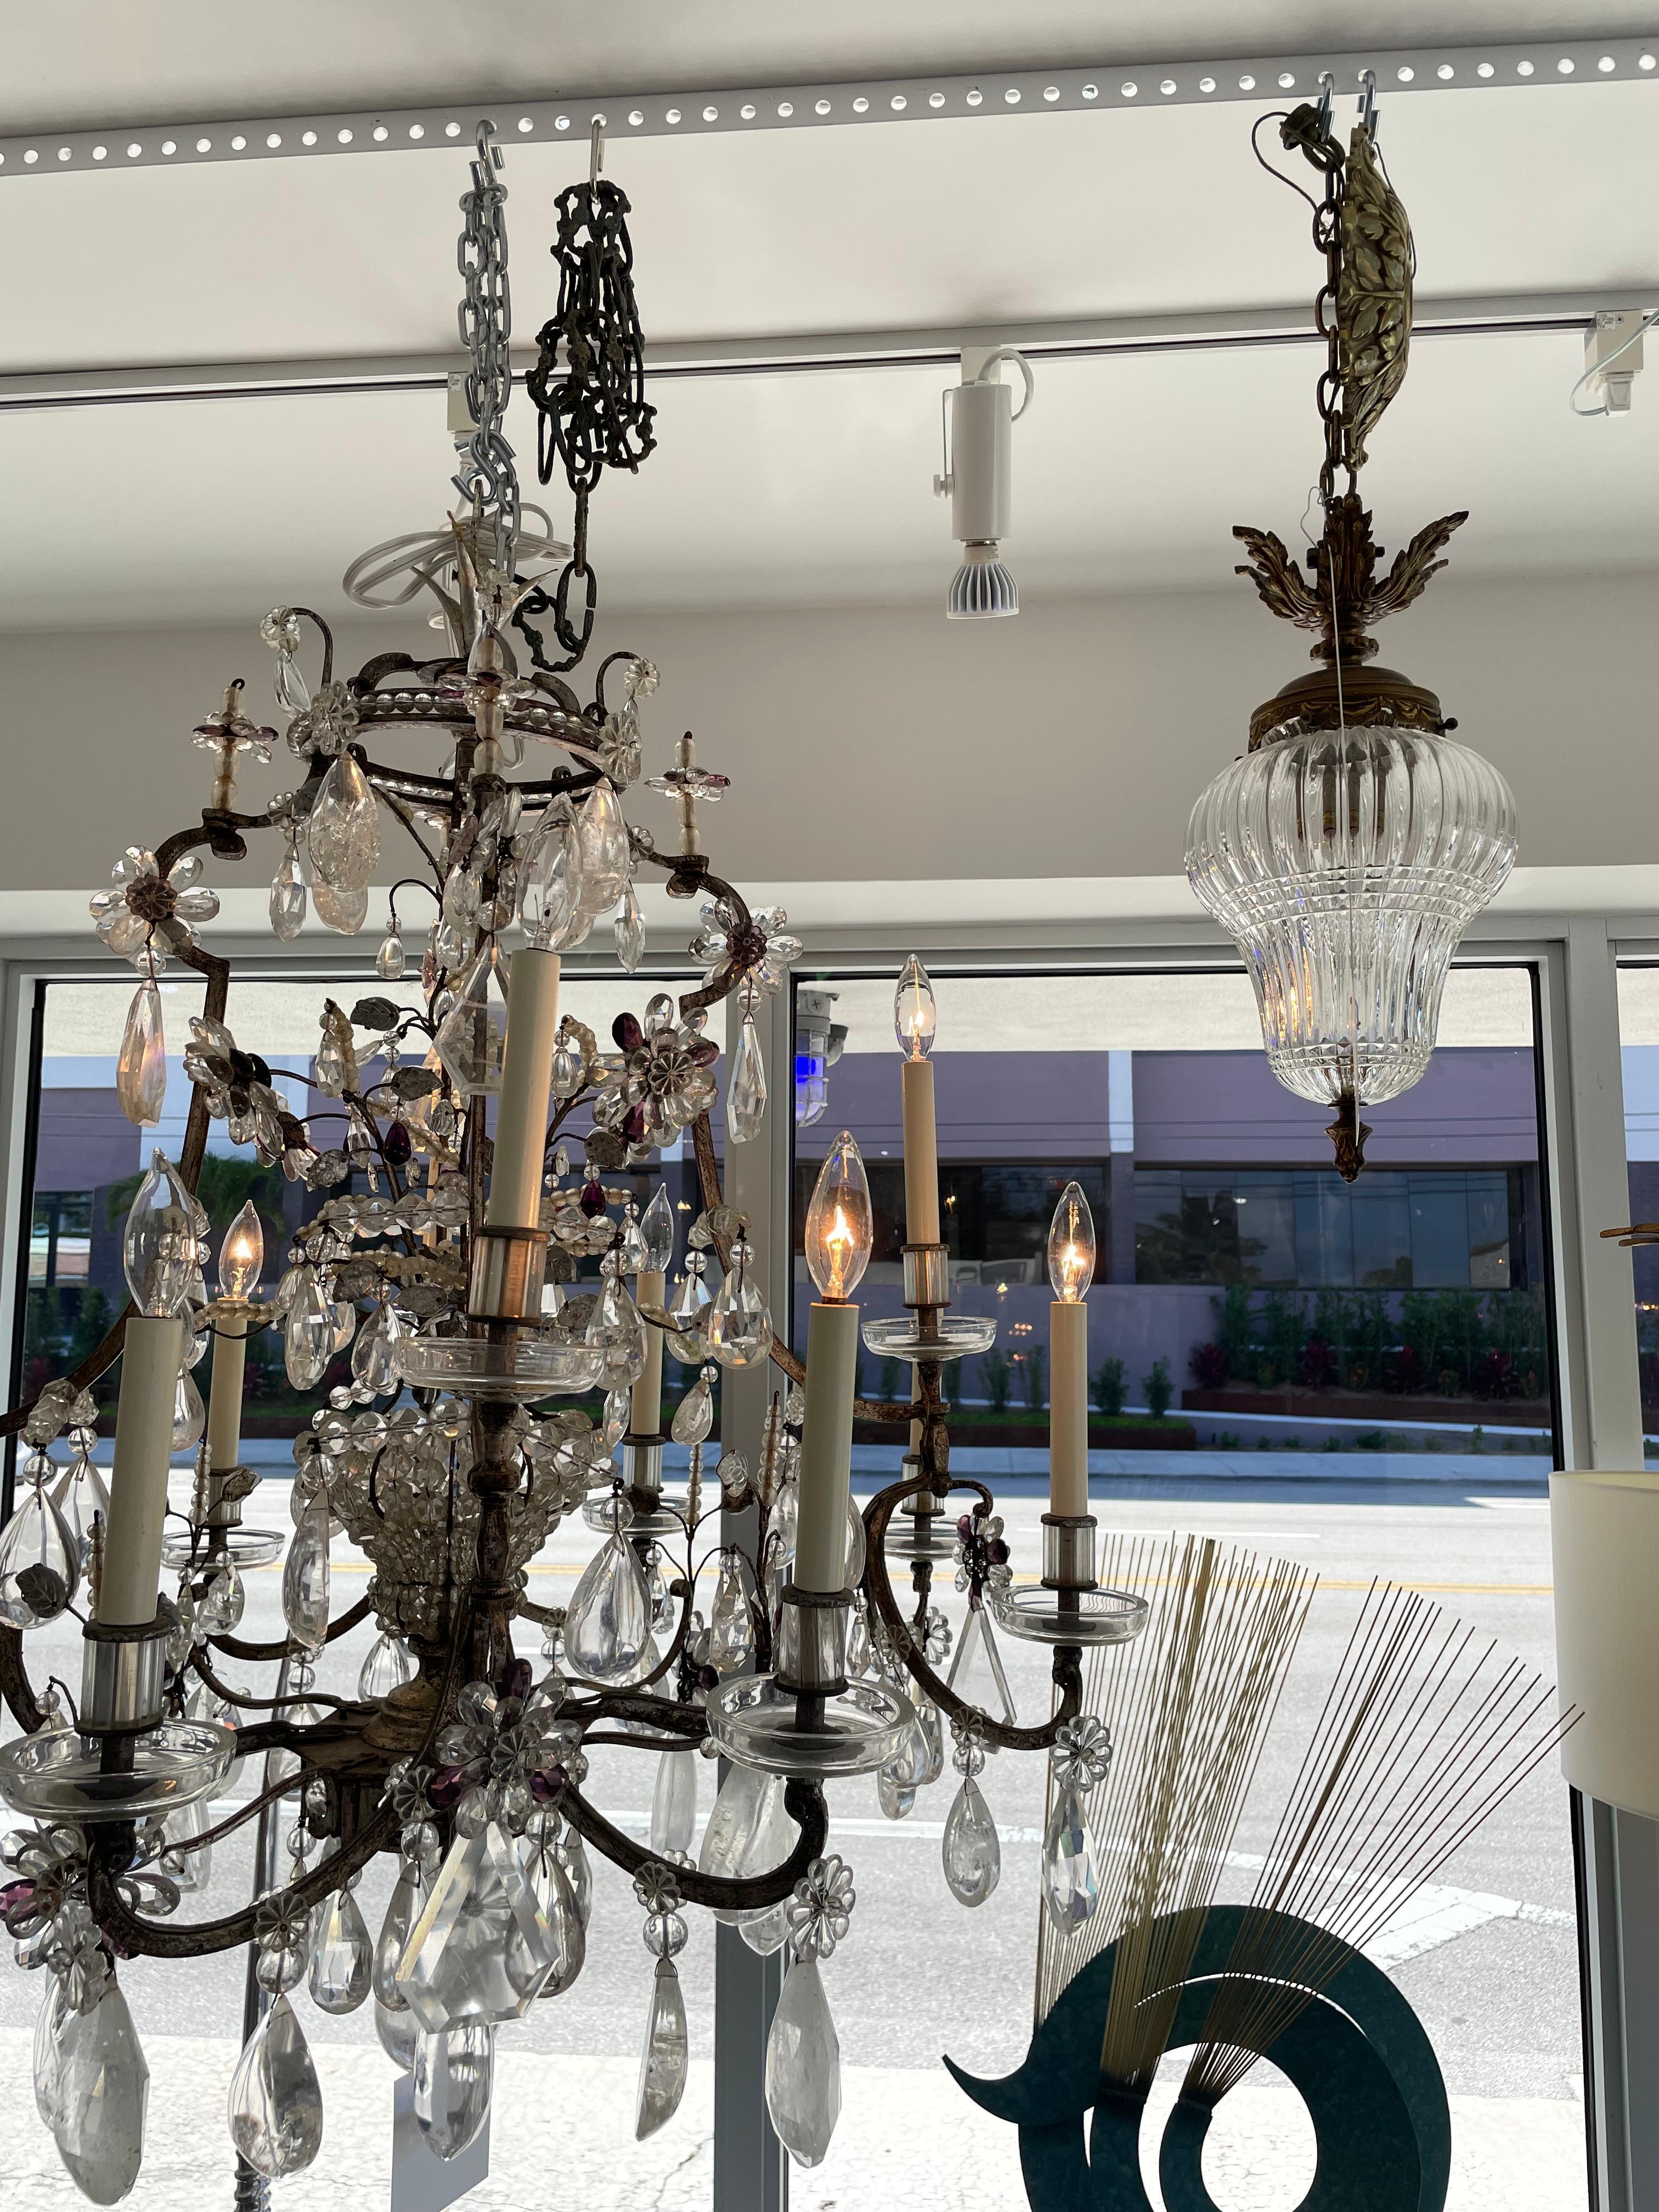 This stylish and chic pear-shaped chandelier was acquired from a Palm Beach estate and is the perfect size for a foyer, powder room or perhaps dressing closet.

The bronze casting have aged to a beautiful patina, and the handcut crystal globe